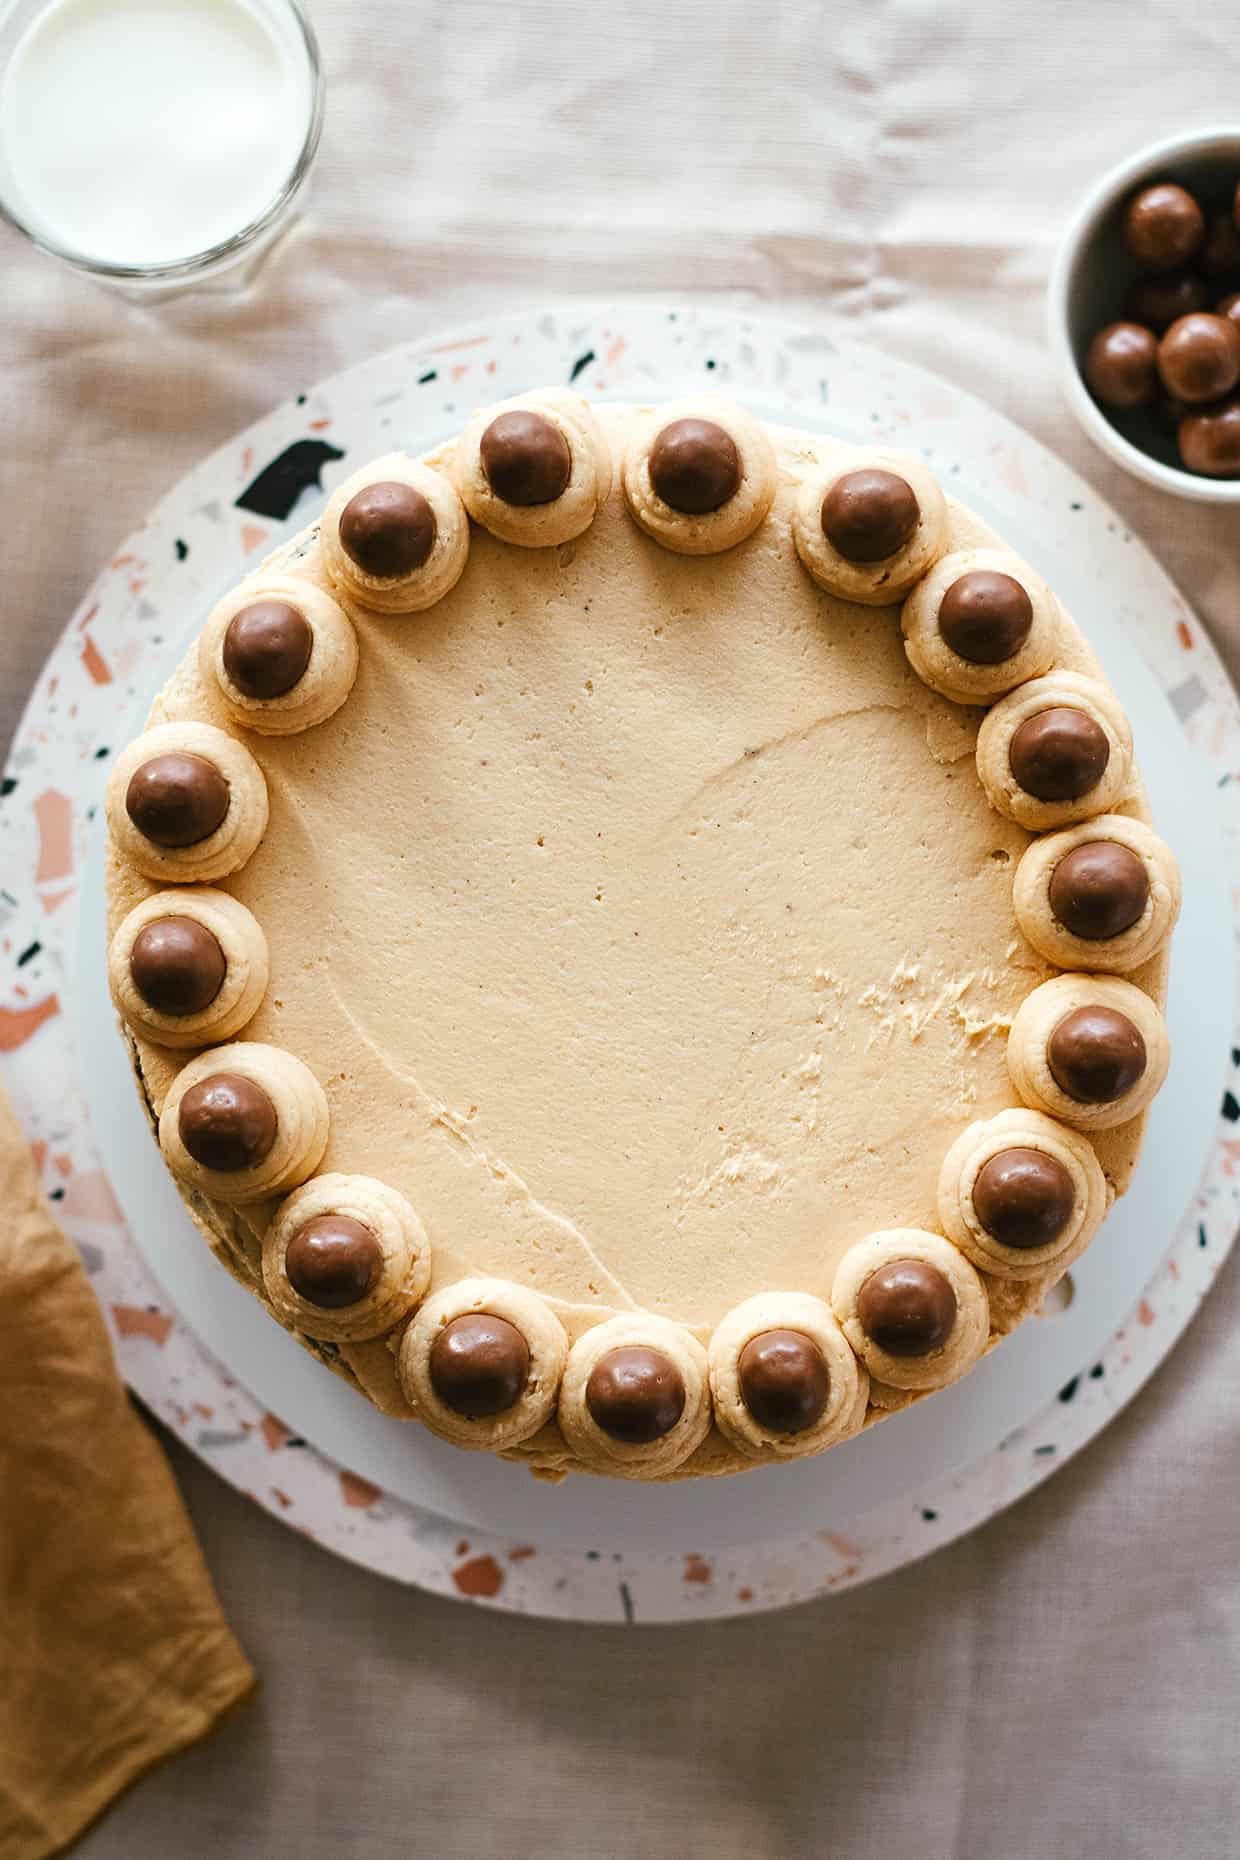 top view of Rich chocolate peanut butter cake decorated with malt chocolate balls